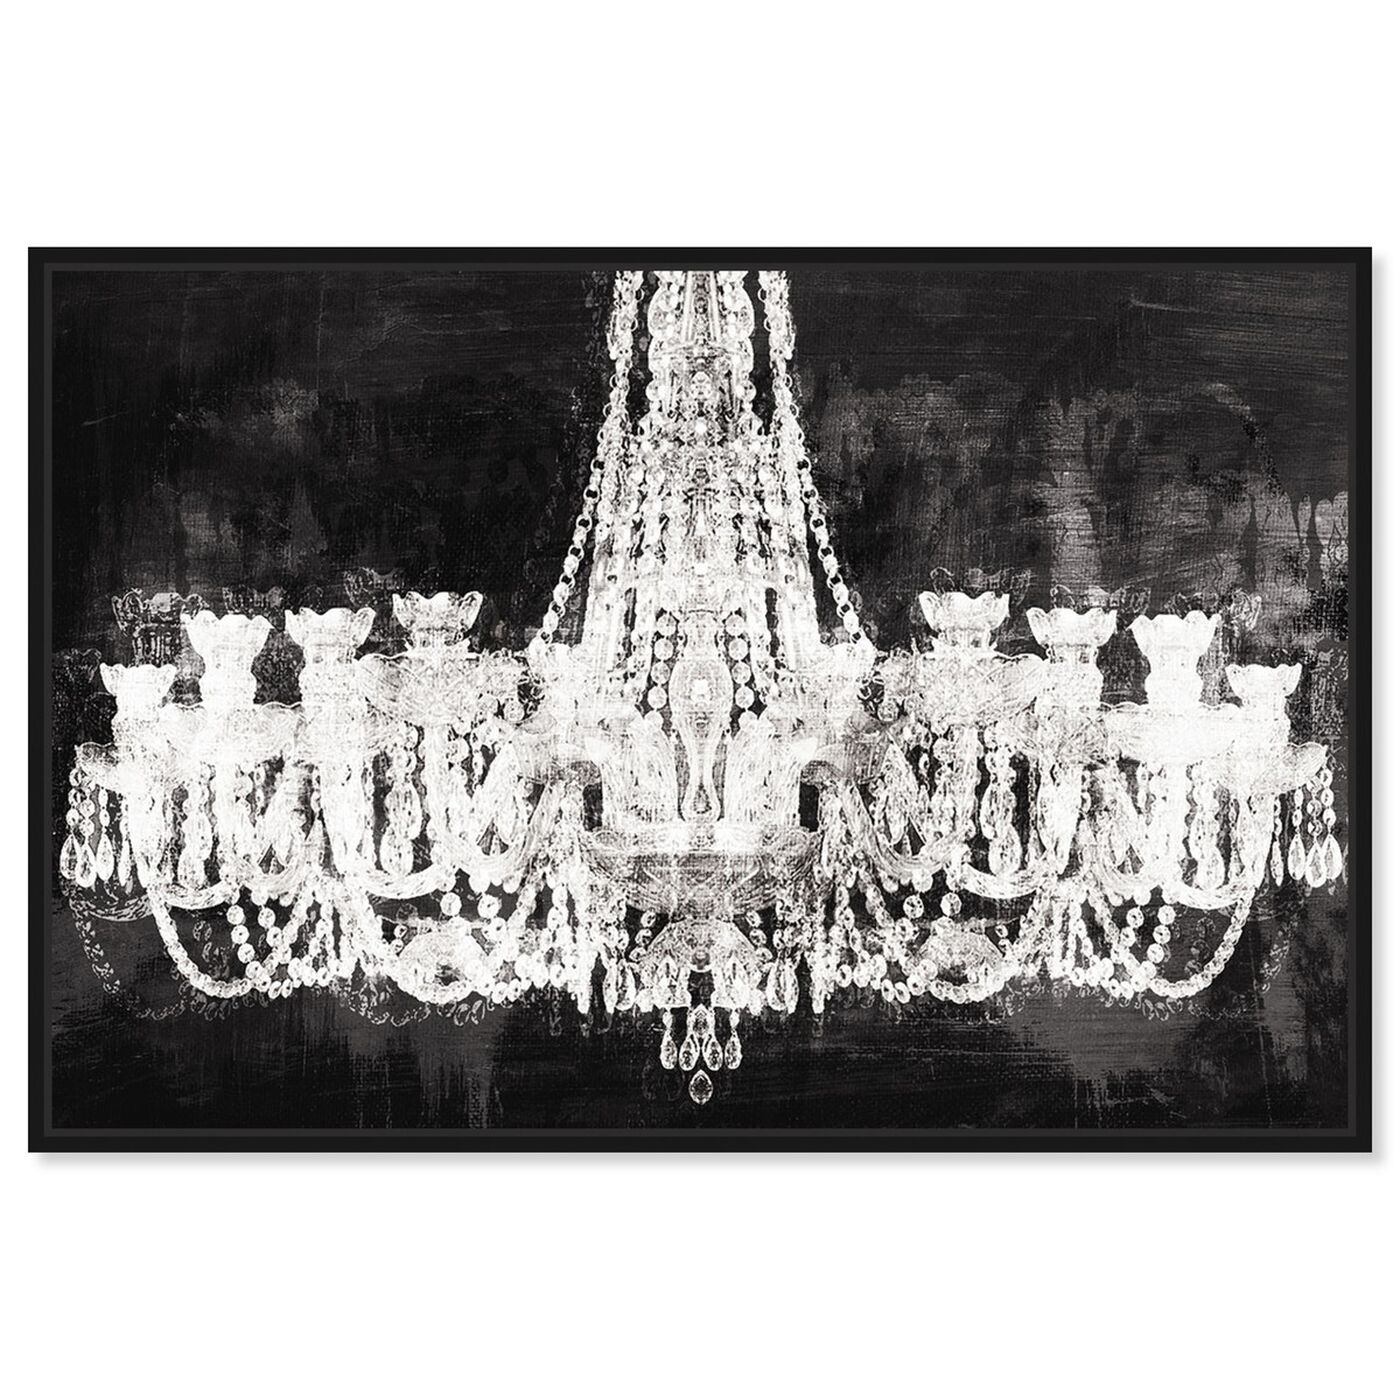 Front view of Decadent Soiree featuring fashion and glam and chandeliers art.